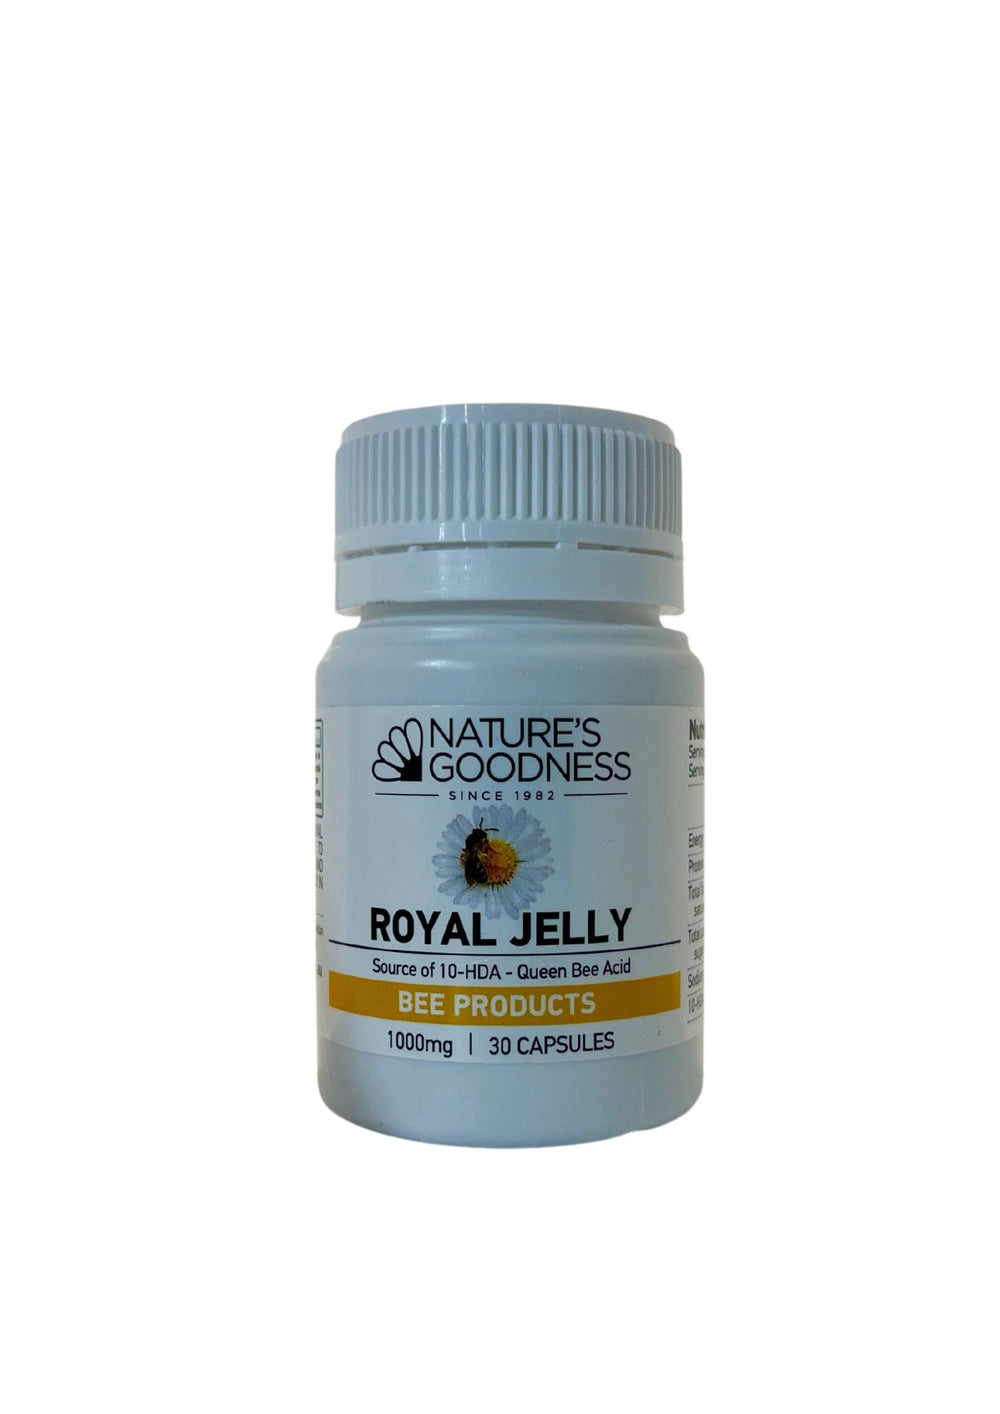 Nature's Goodness Royal Jelly